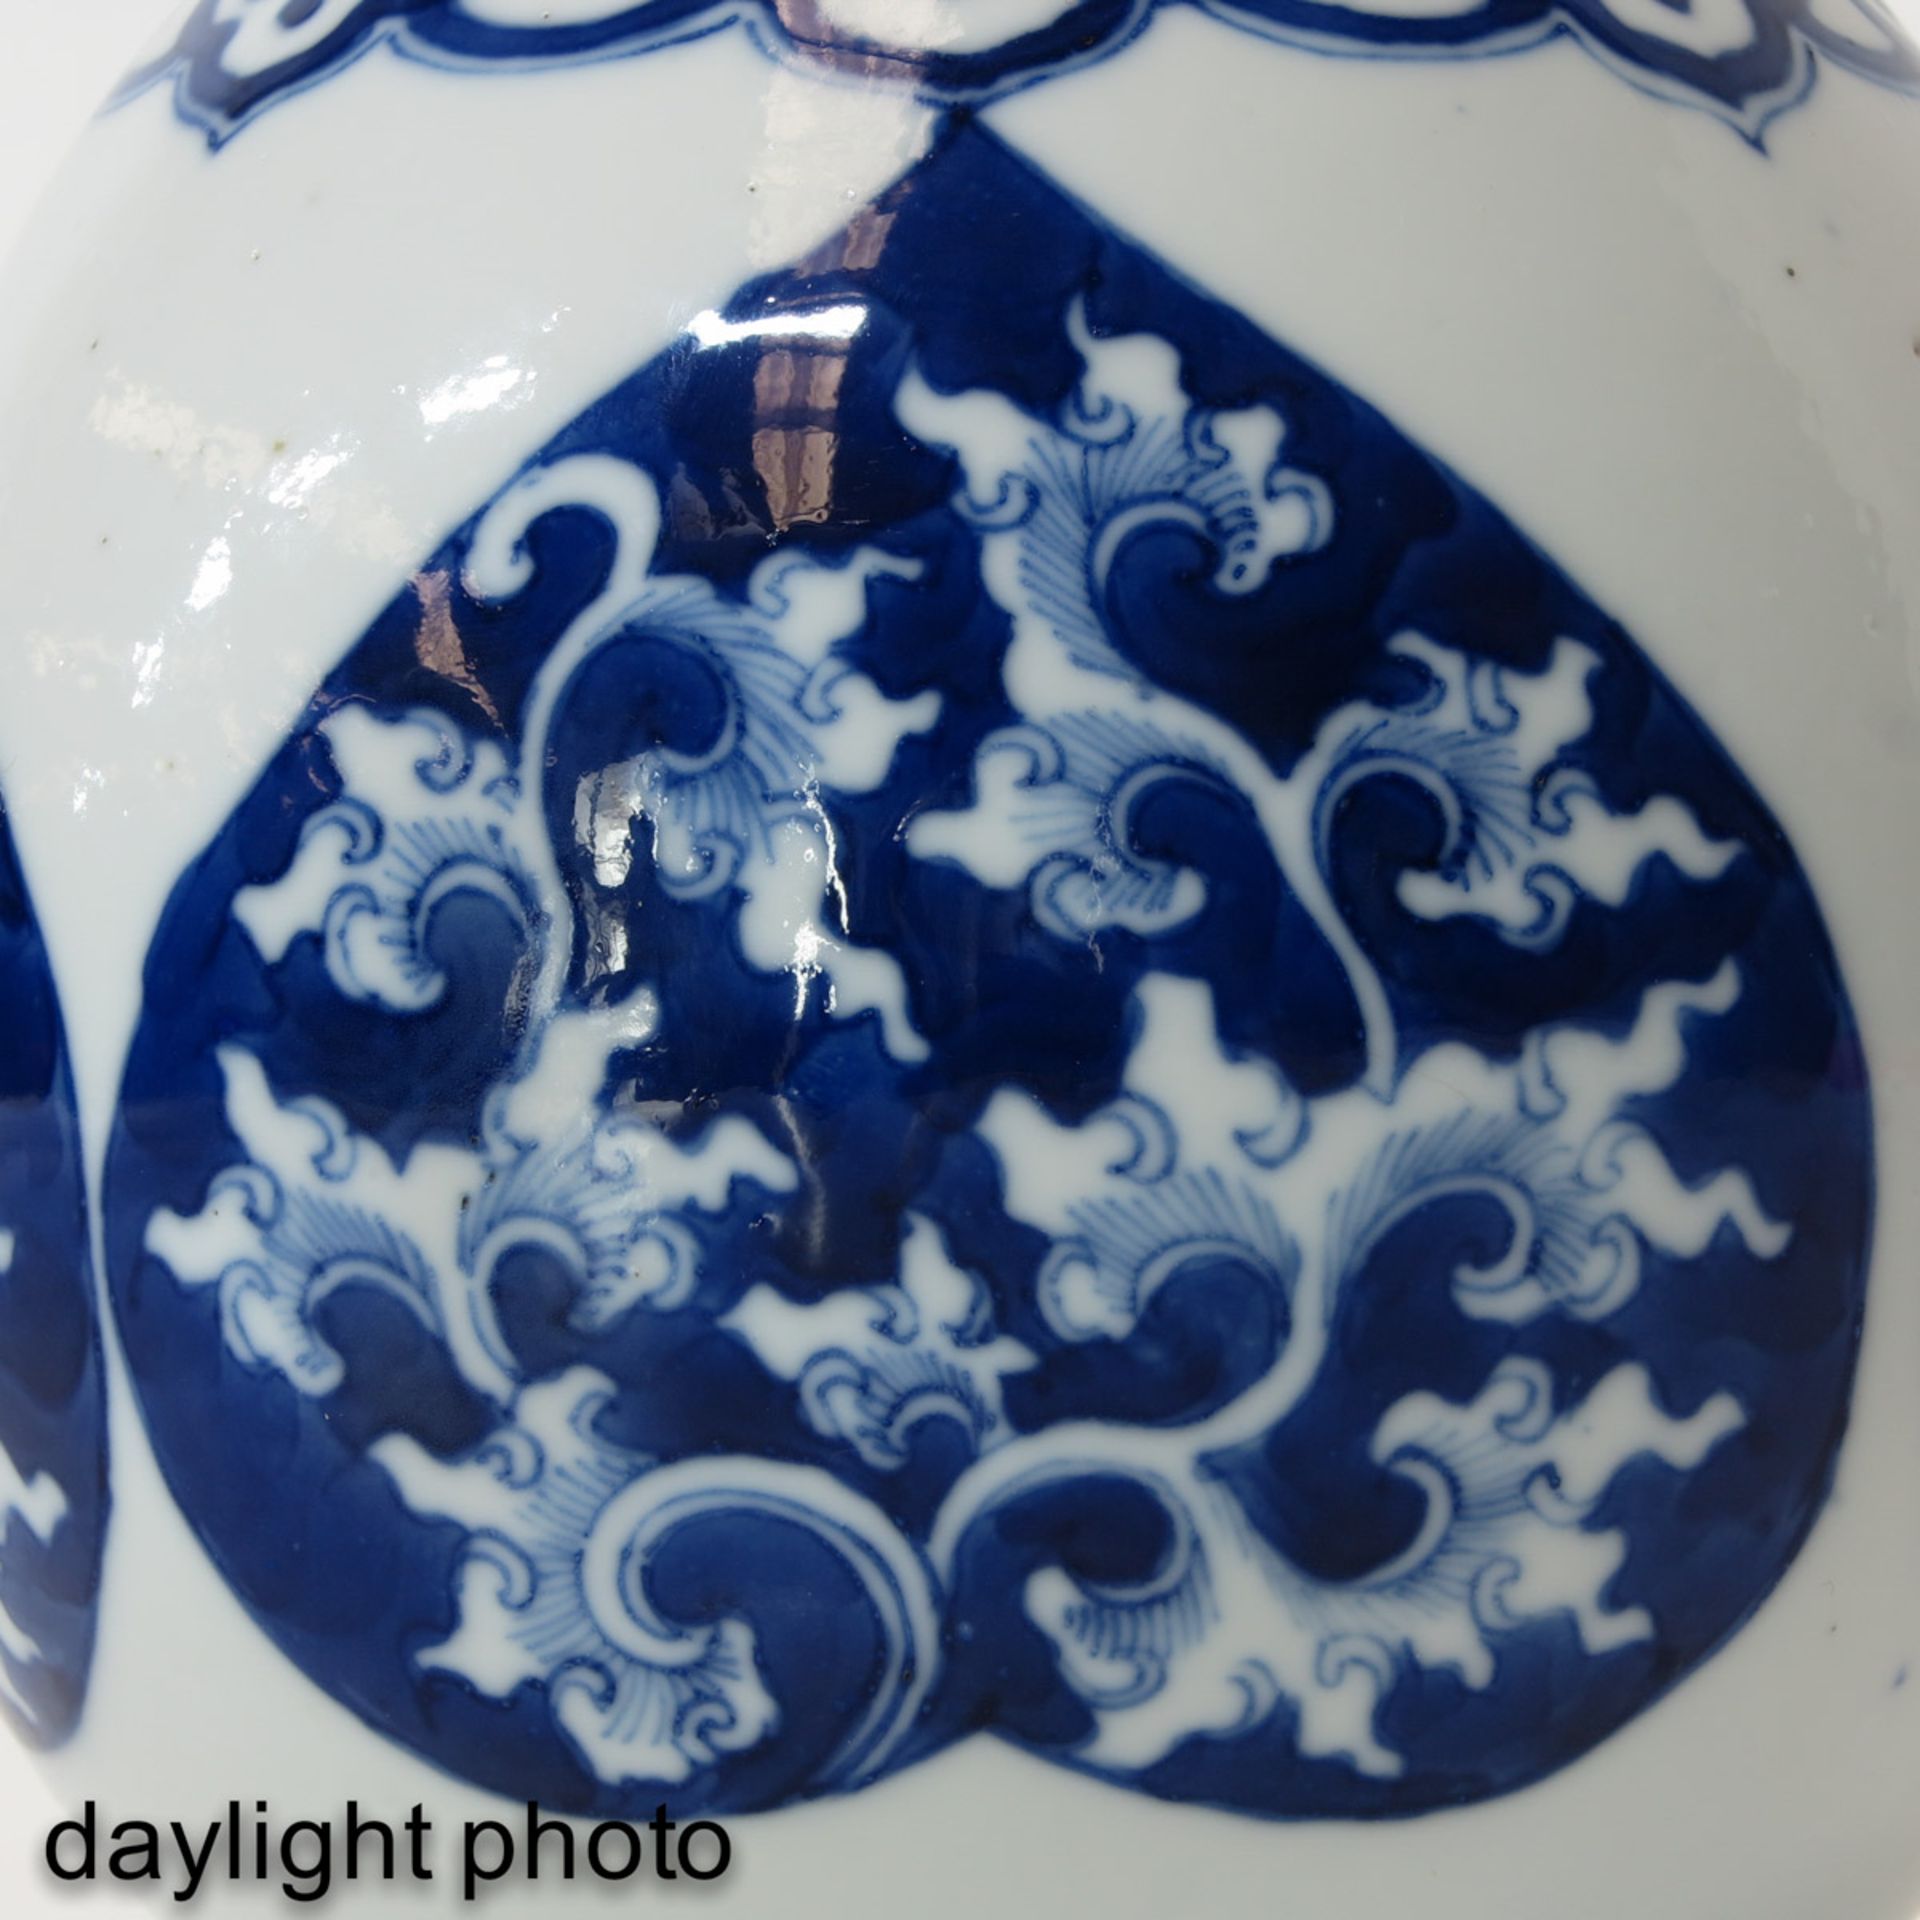 A Blue and White Bottle Vase - Image 9 of 9